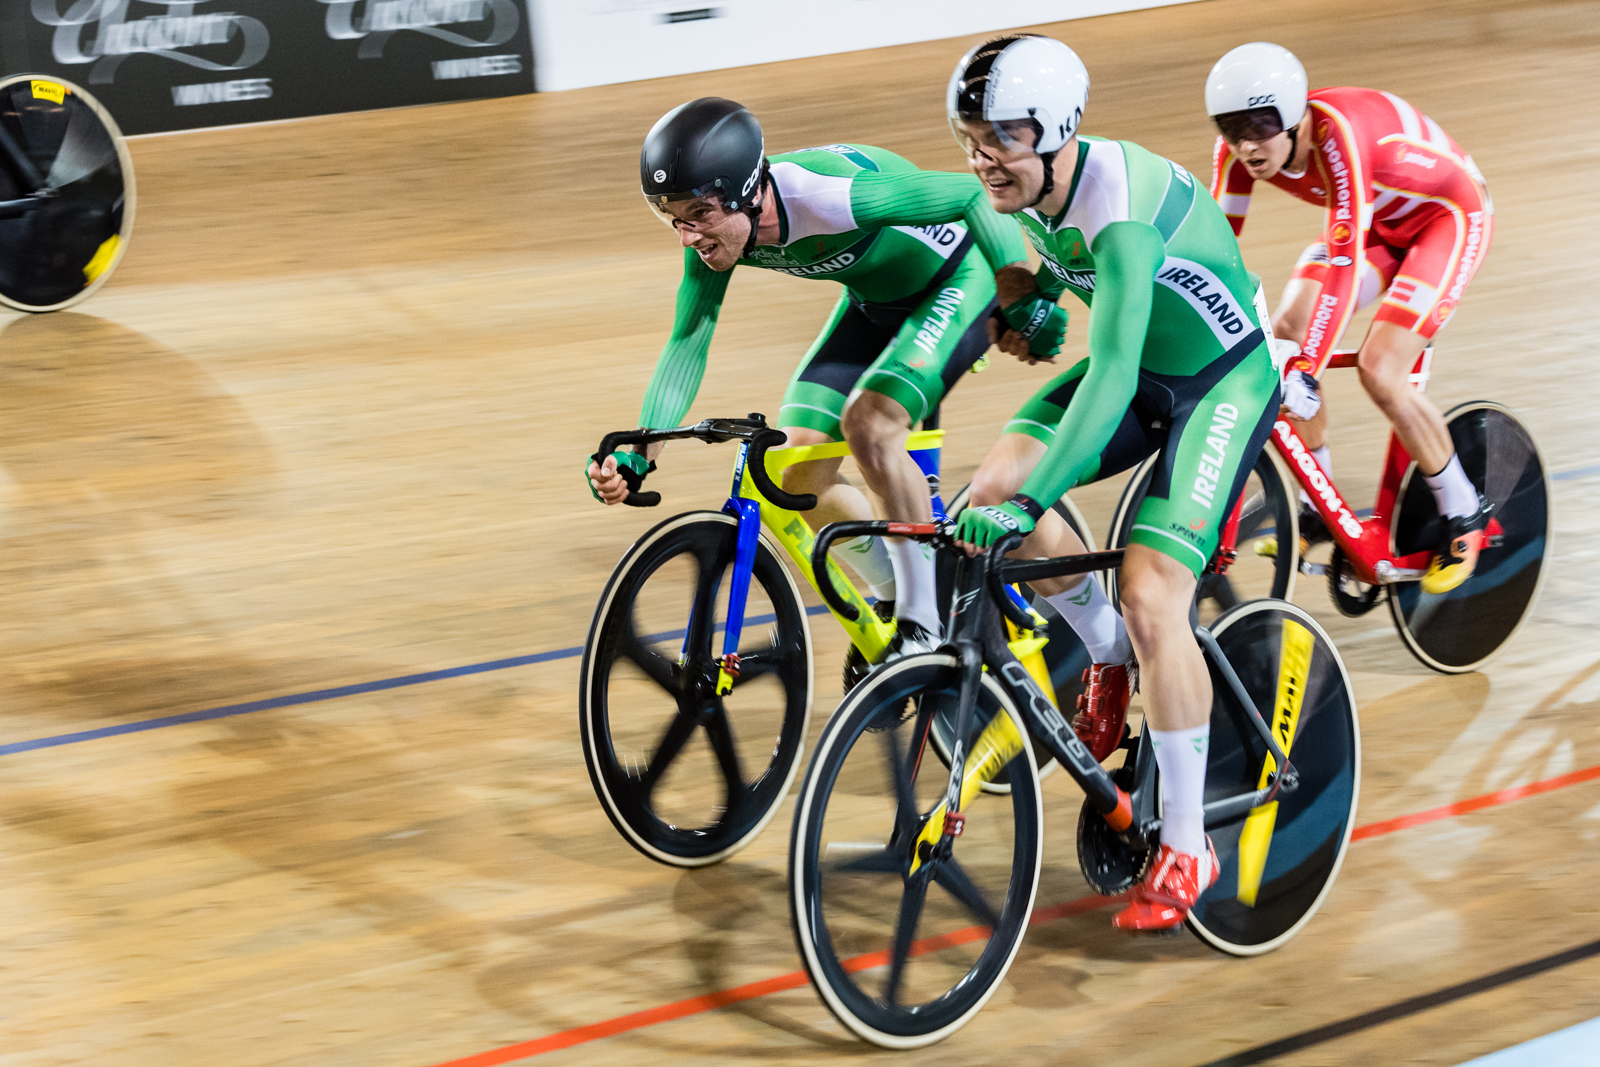 downey-and-english-win-madison-gold-at-uci-track-cycling-world-cup